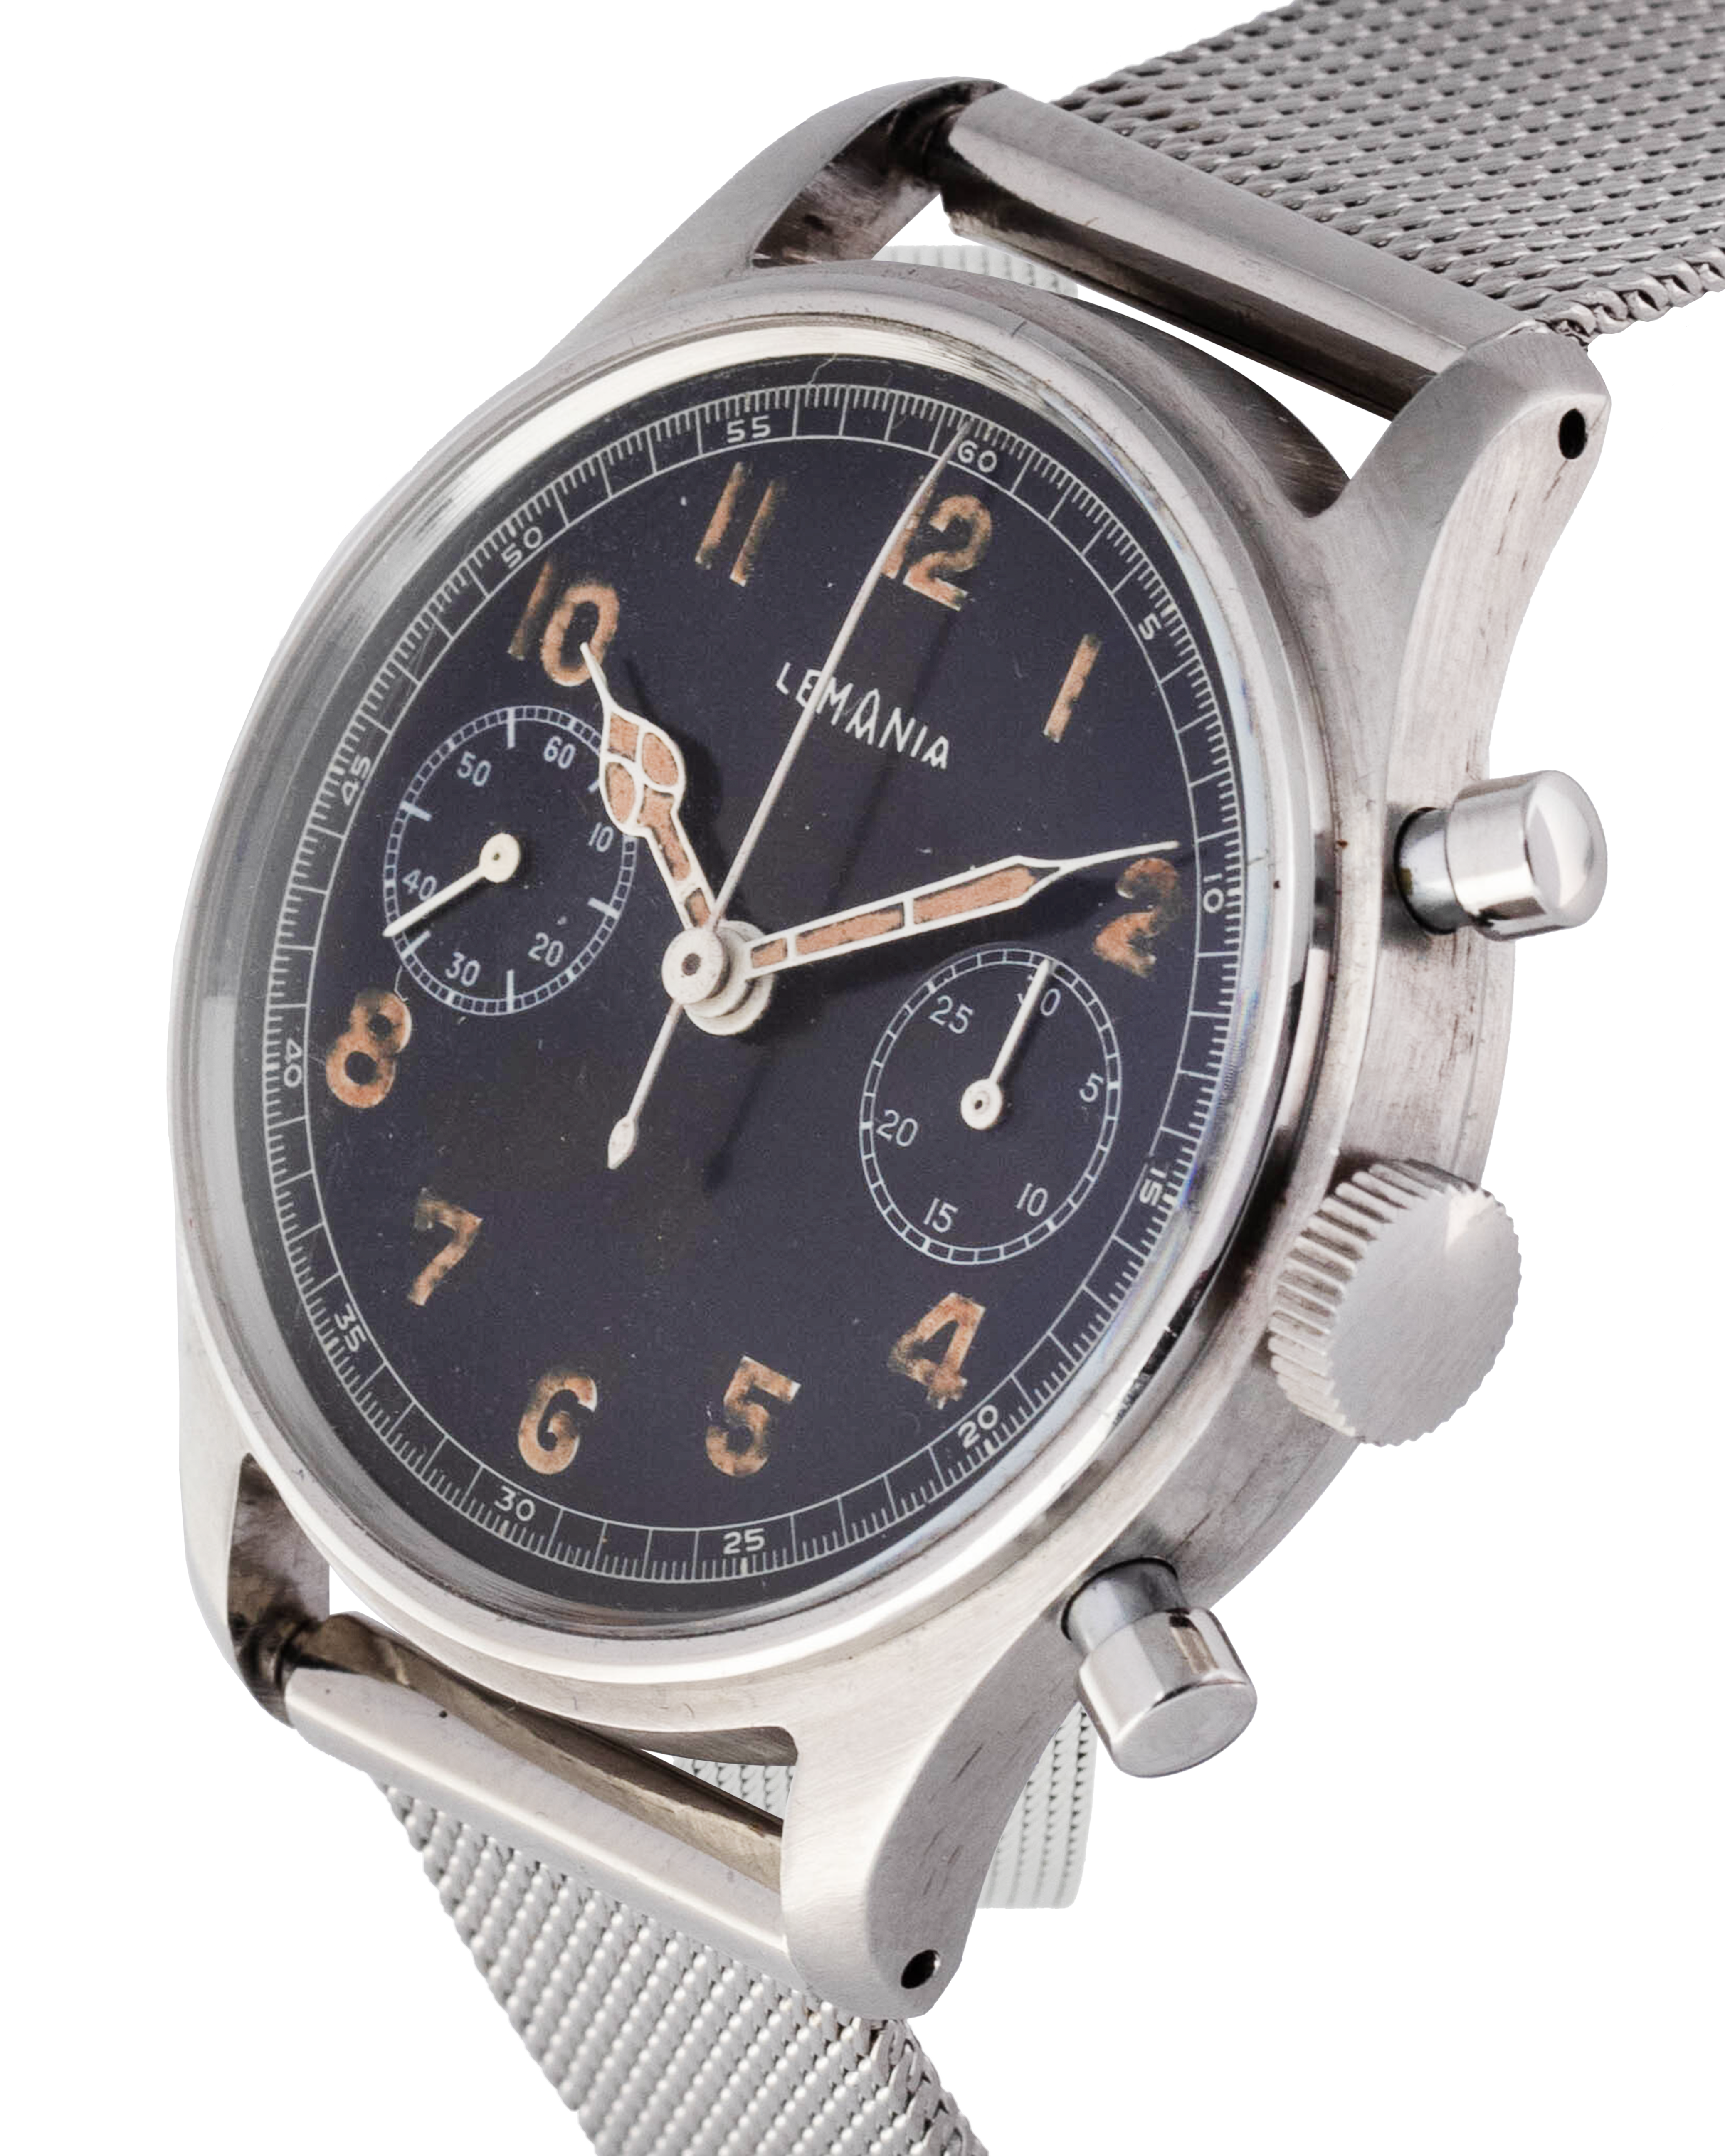 Lemania Chronograph "Big Arabic Numerals" stainless steel and black dial 